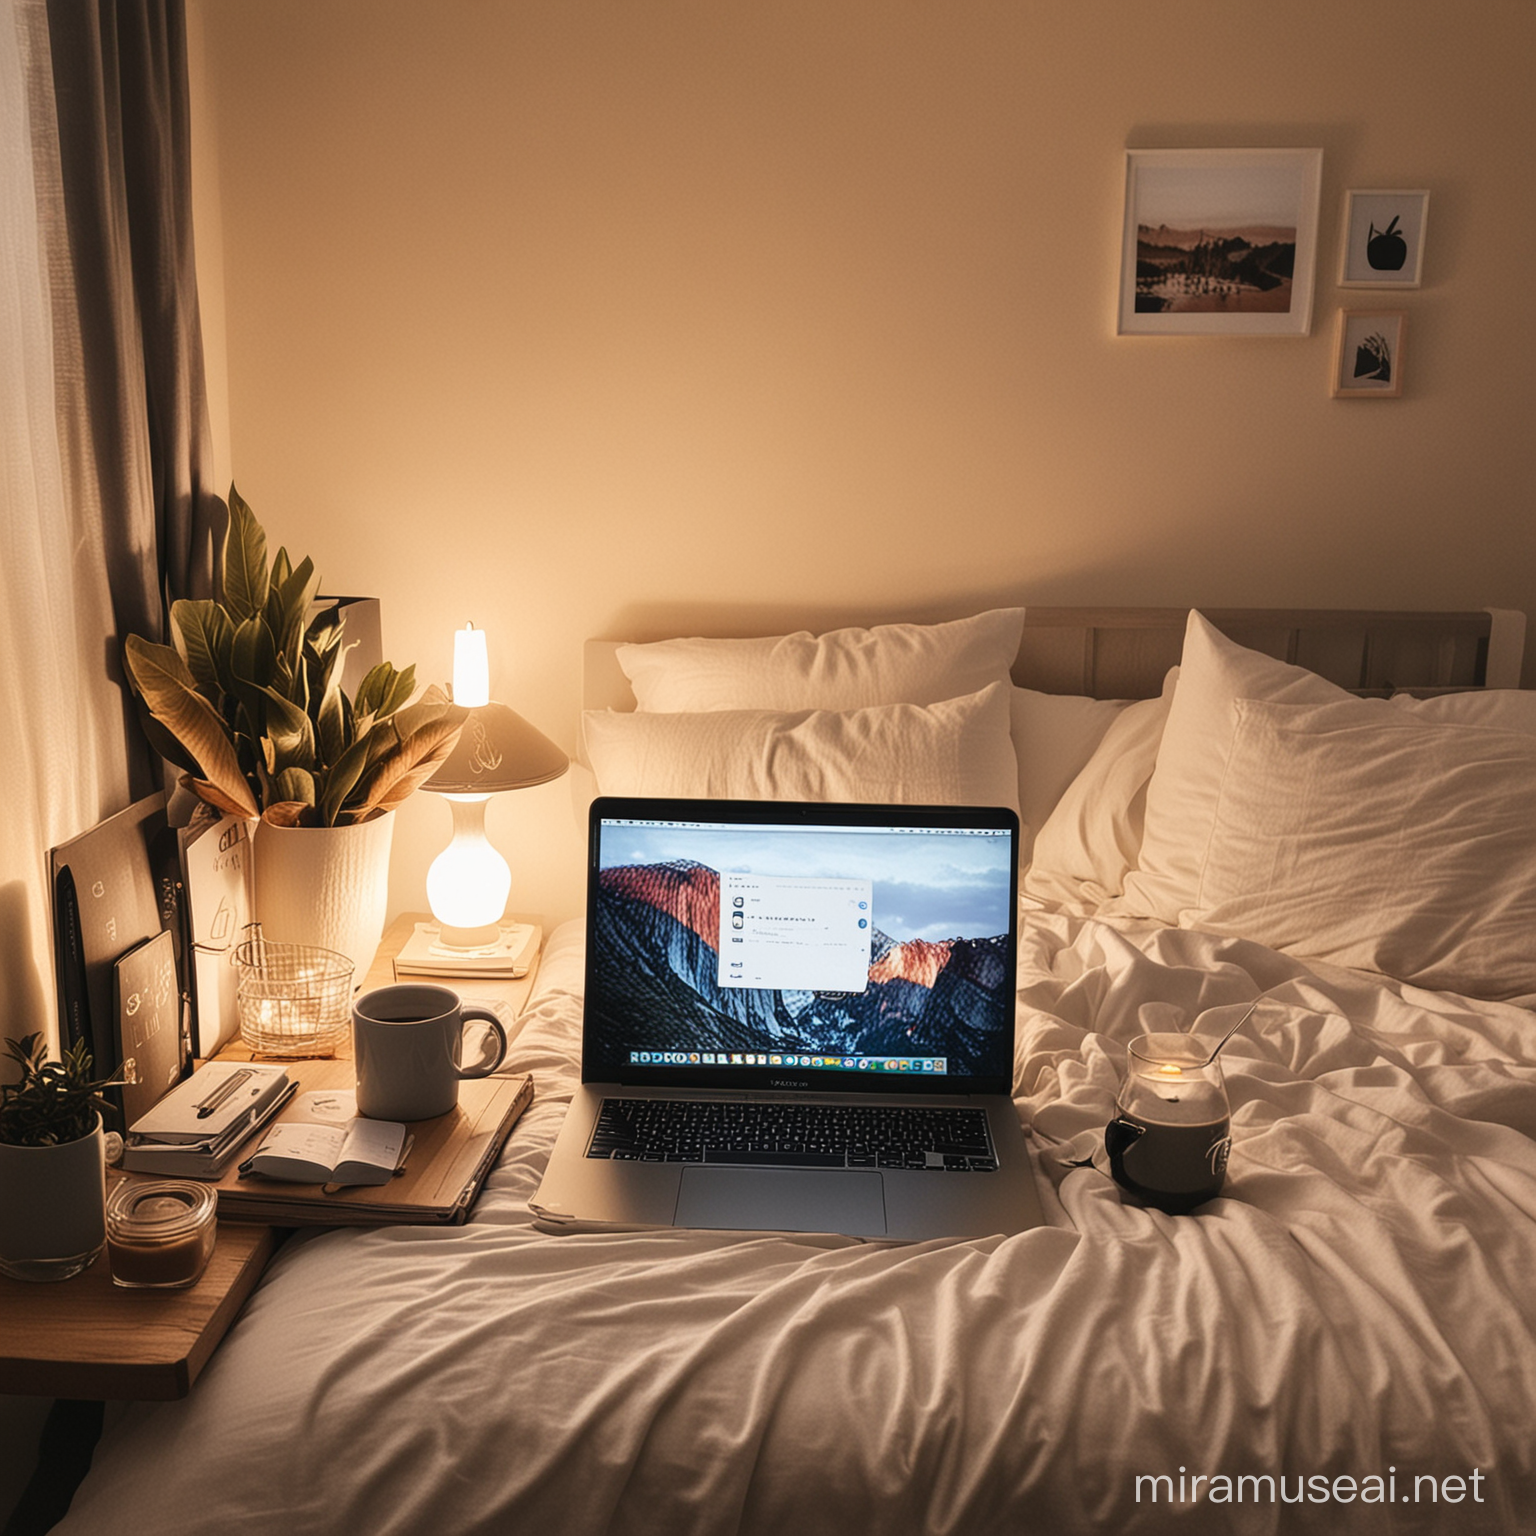 Cozy Bedroom Scene with Laptop and Takeout Containers